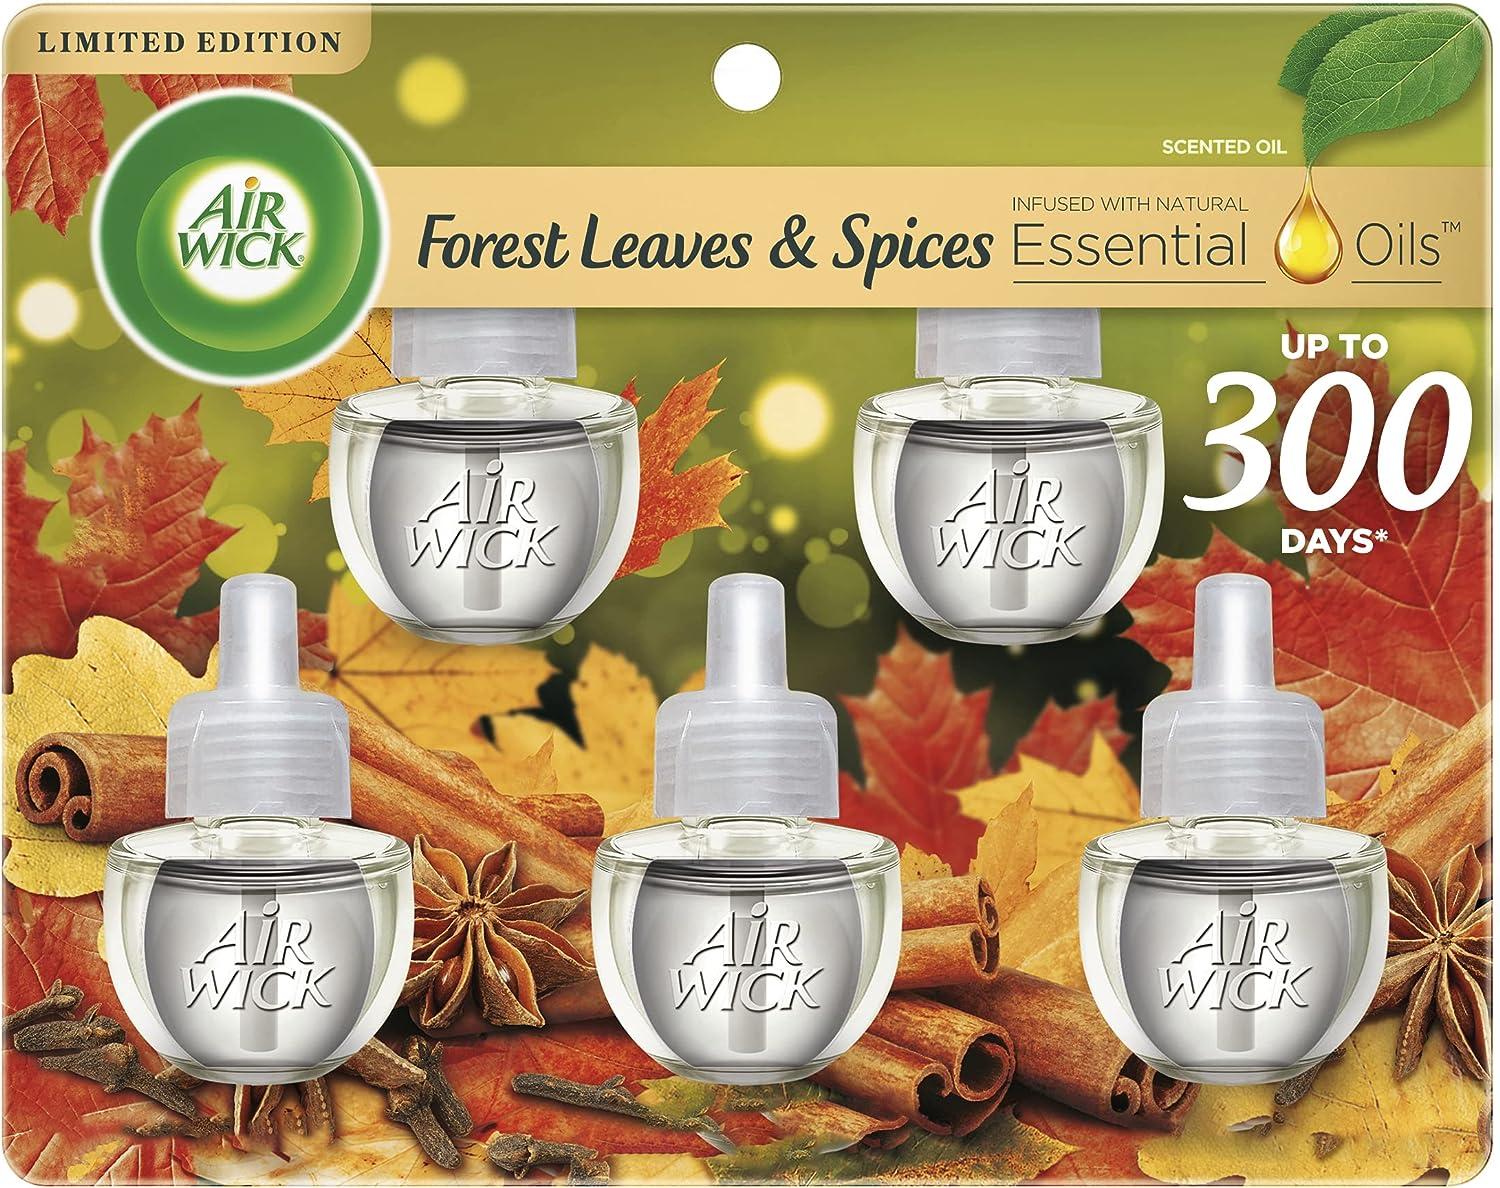 Air Wick Plug In Air Freshener Scented Oil Refill Fall Scent 5 Pack for $4.38 Shipped